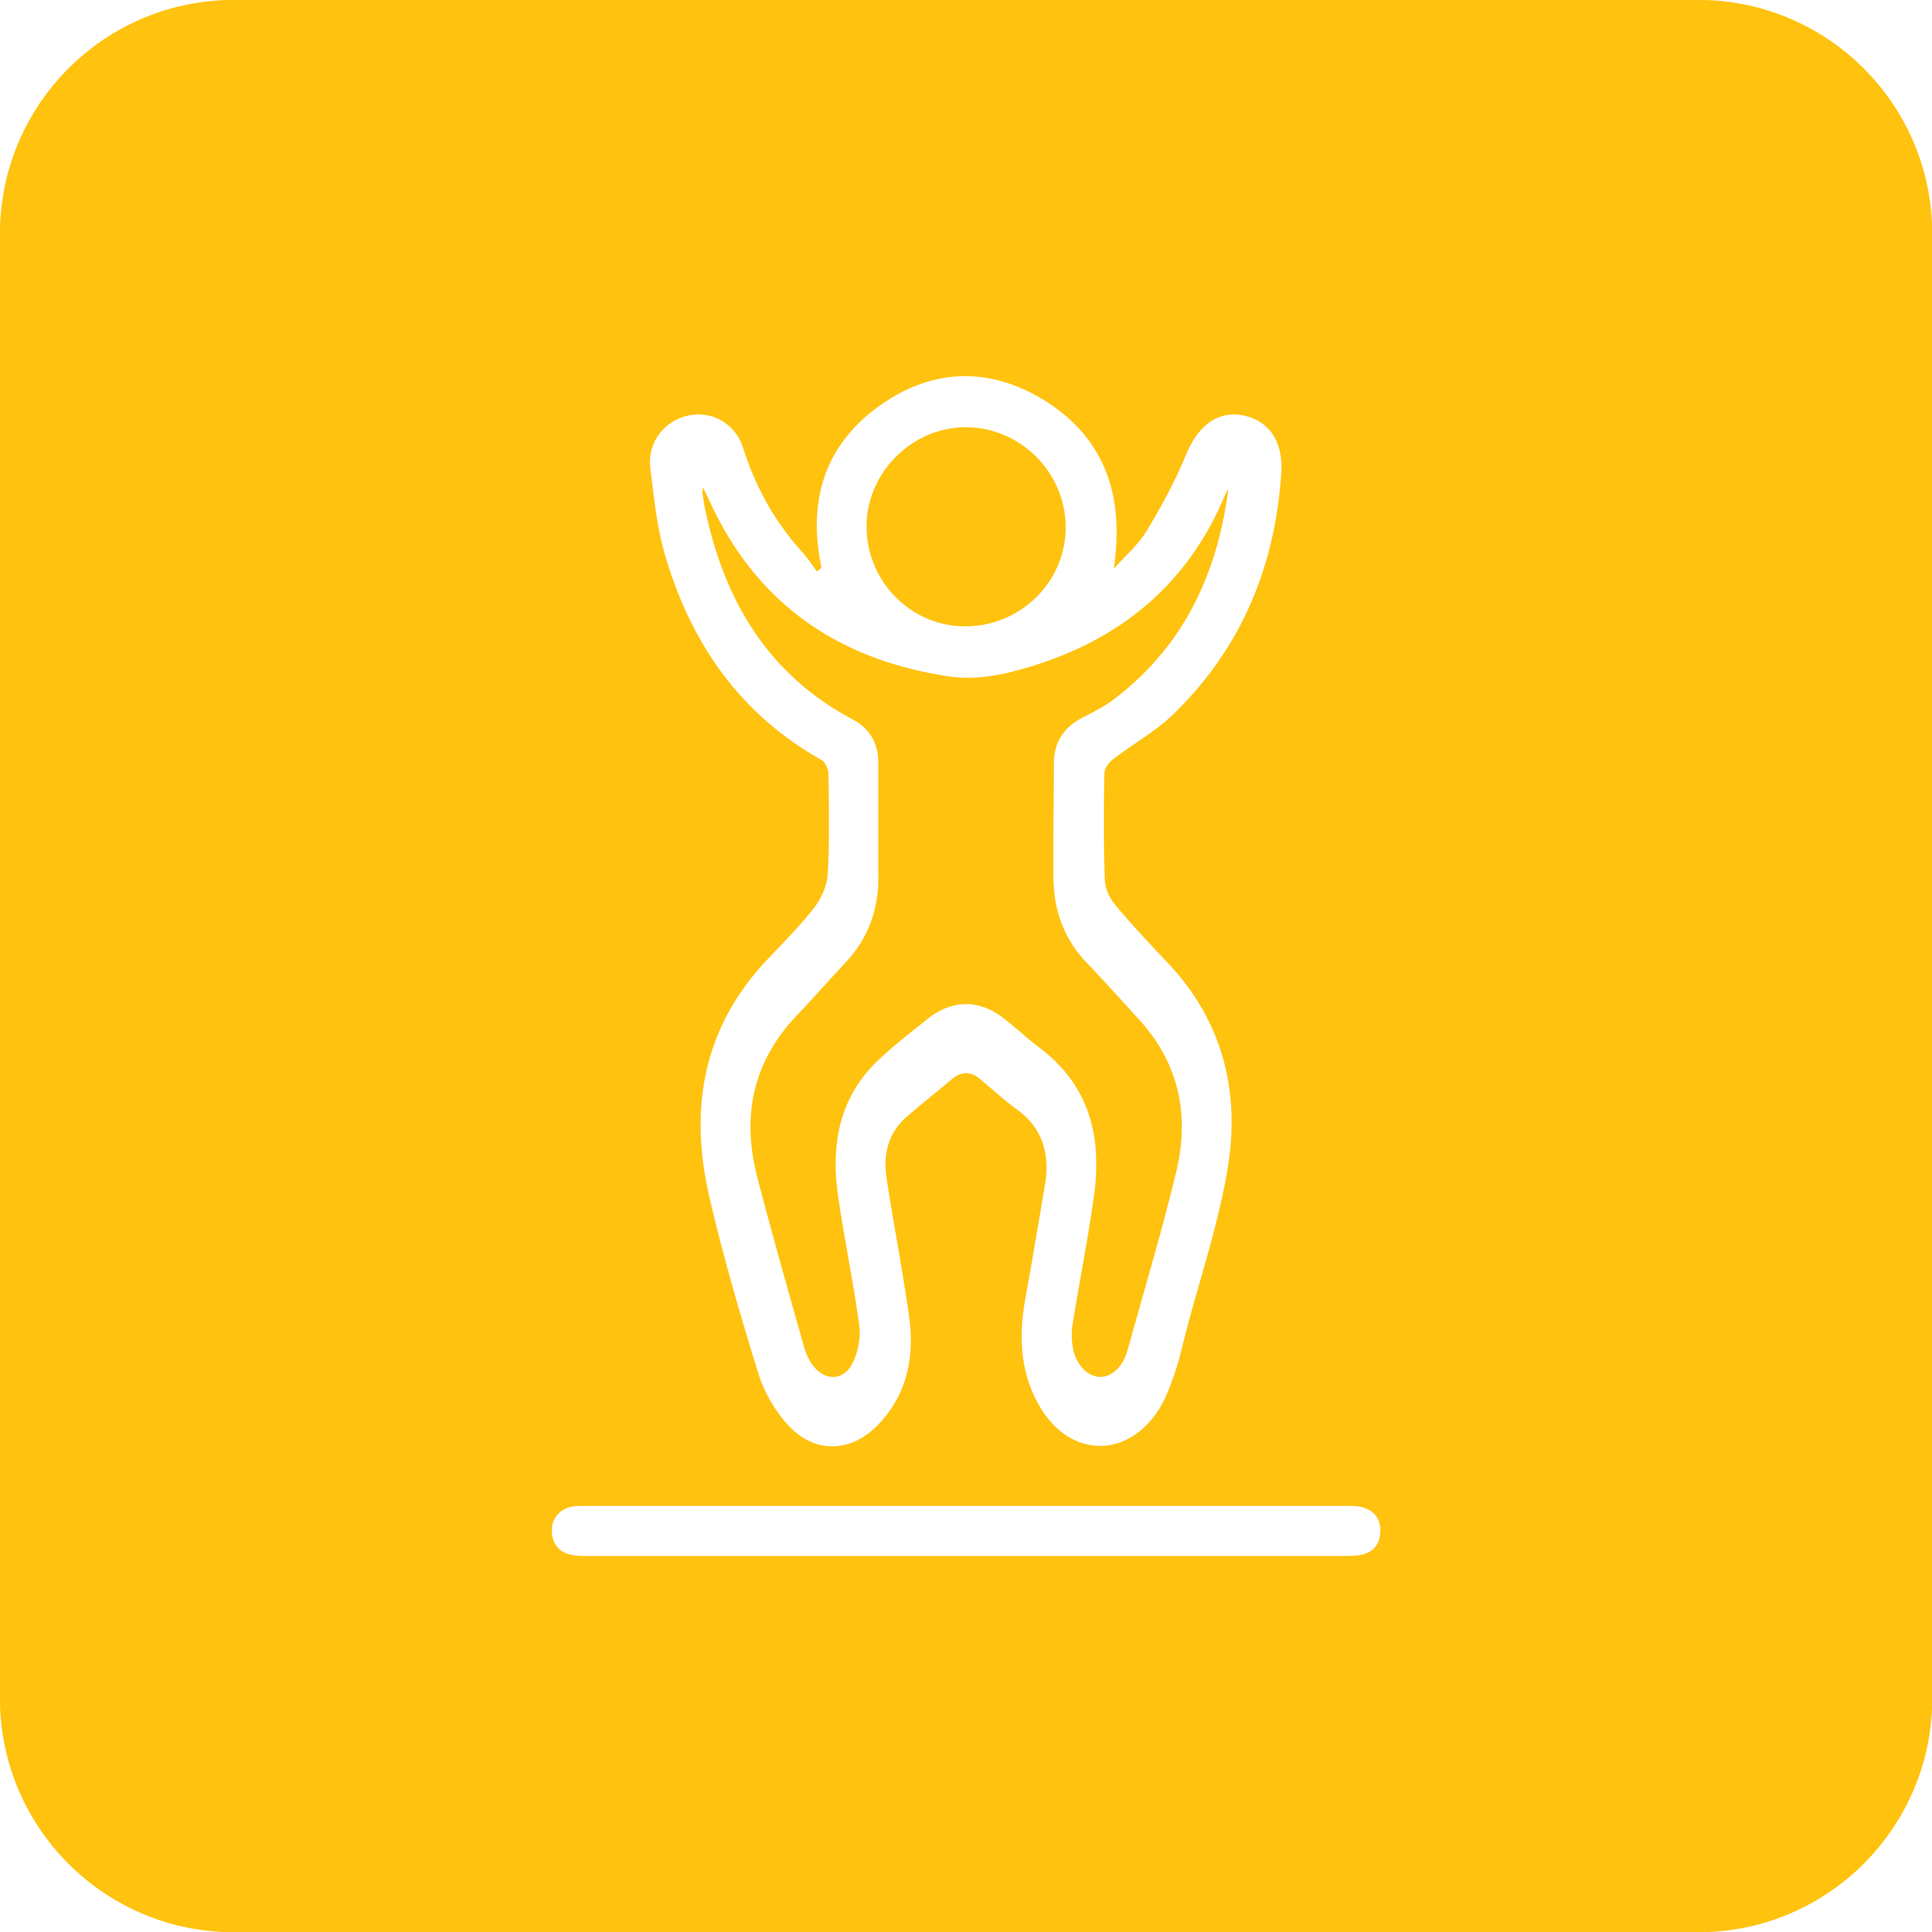 Icon of a person jumping on a yellow background